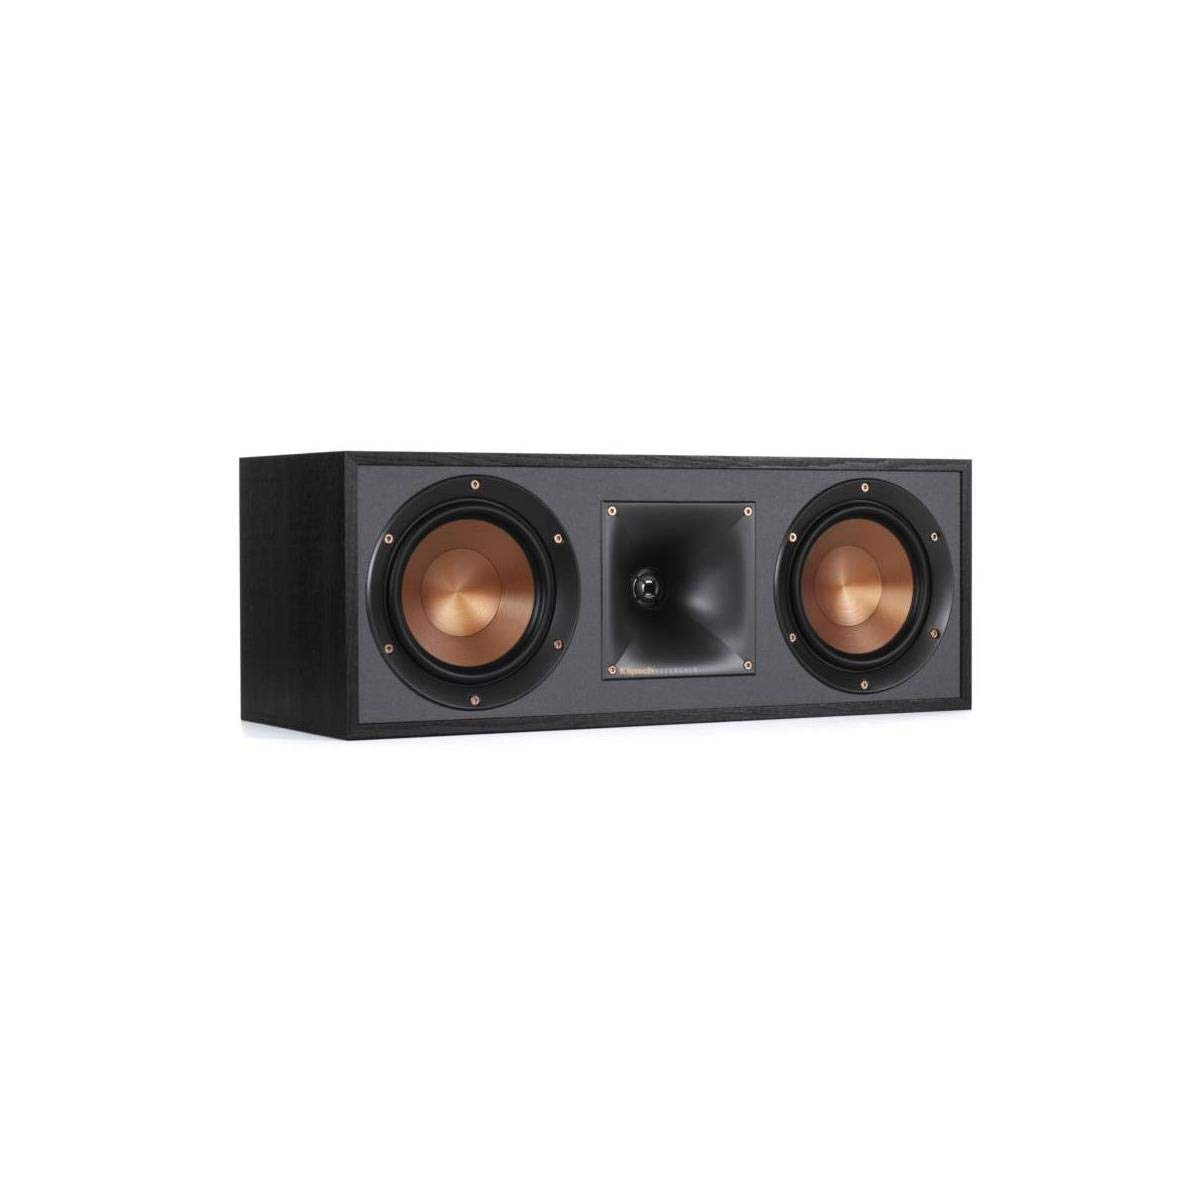 Klipsch Reference 5.1 Home Theater System with 2X R-625FA Dolby Atmos Floorstanding Speaker, R-12SW 12; 400W Powered Subwoofer, R-52C Two-Way Center Channel, R-41M Bookshelf Speakers (Pair), Black